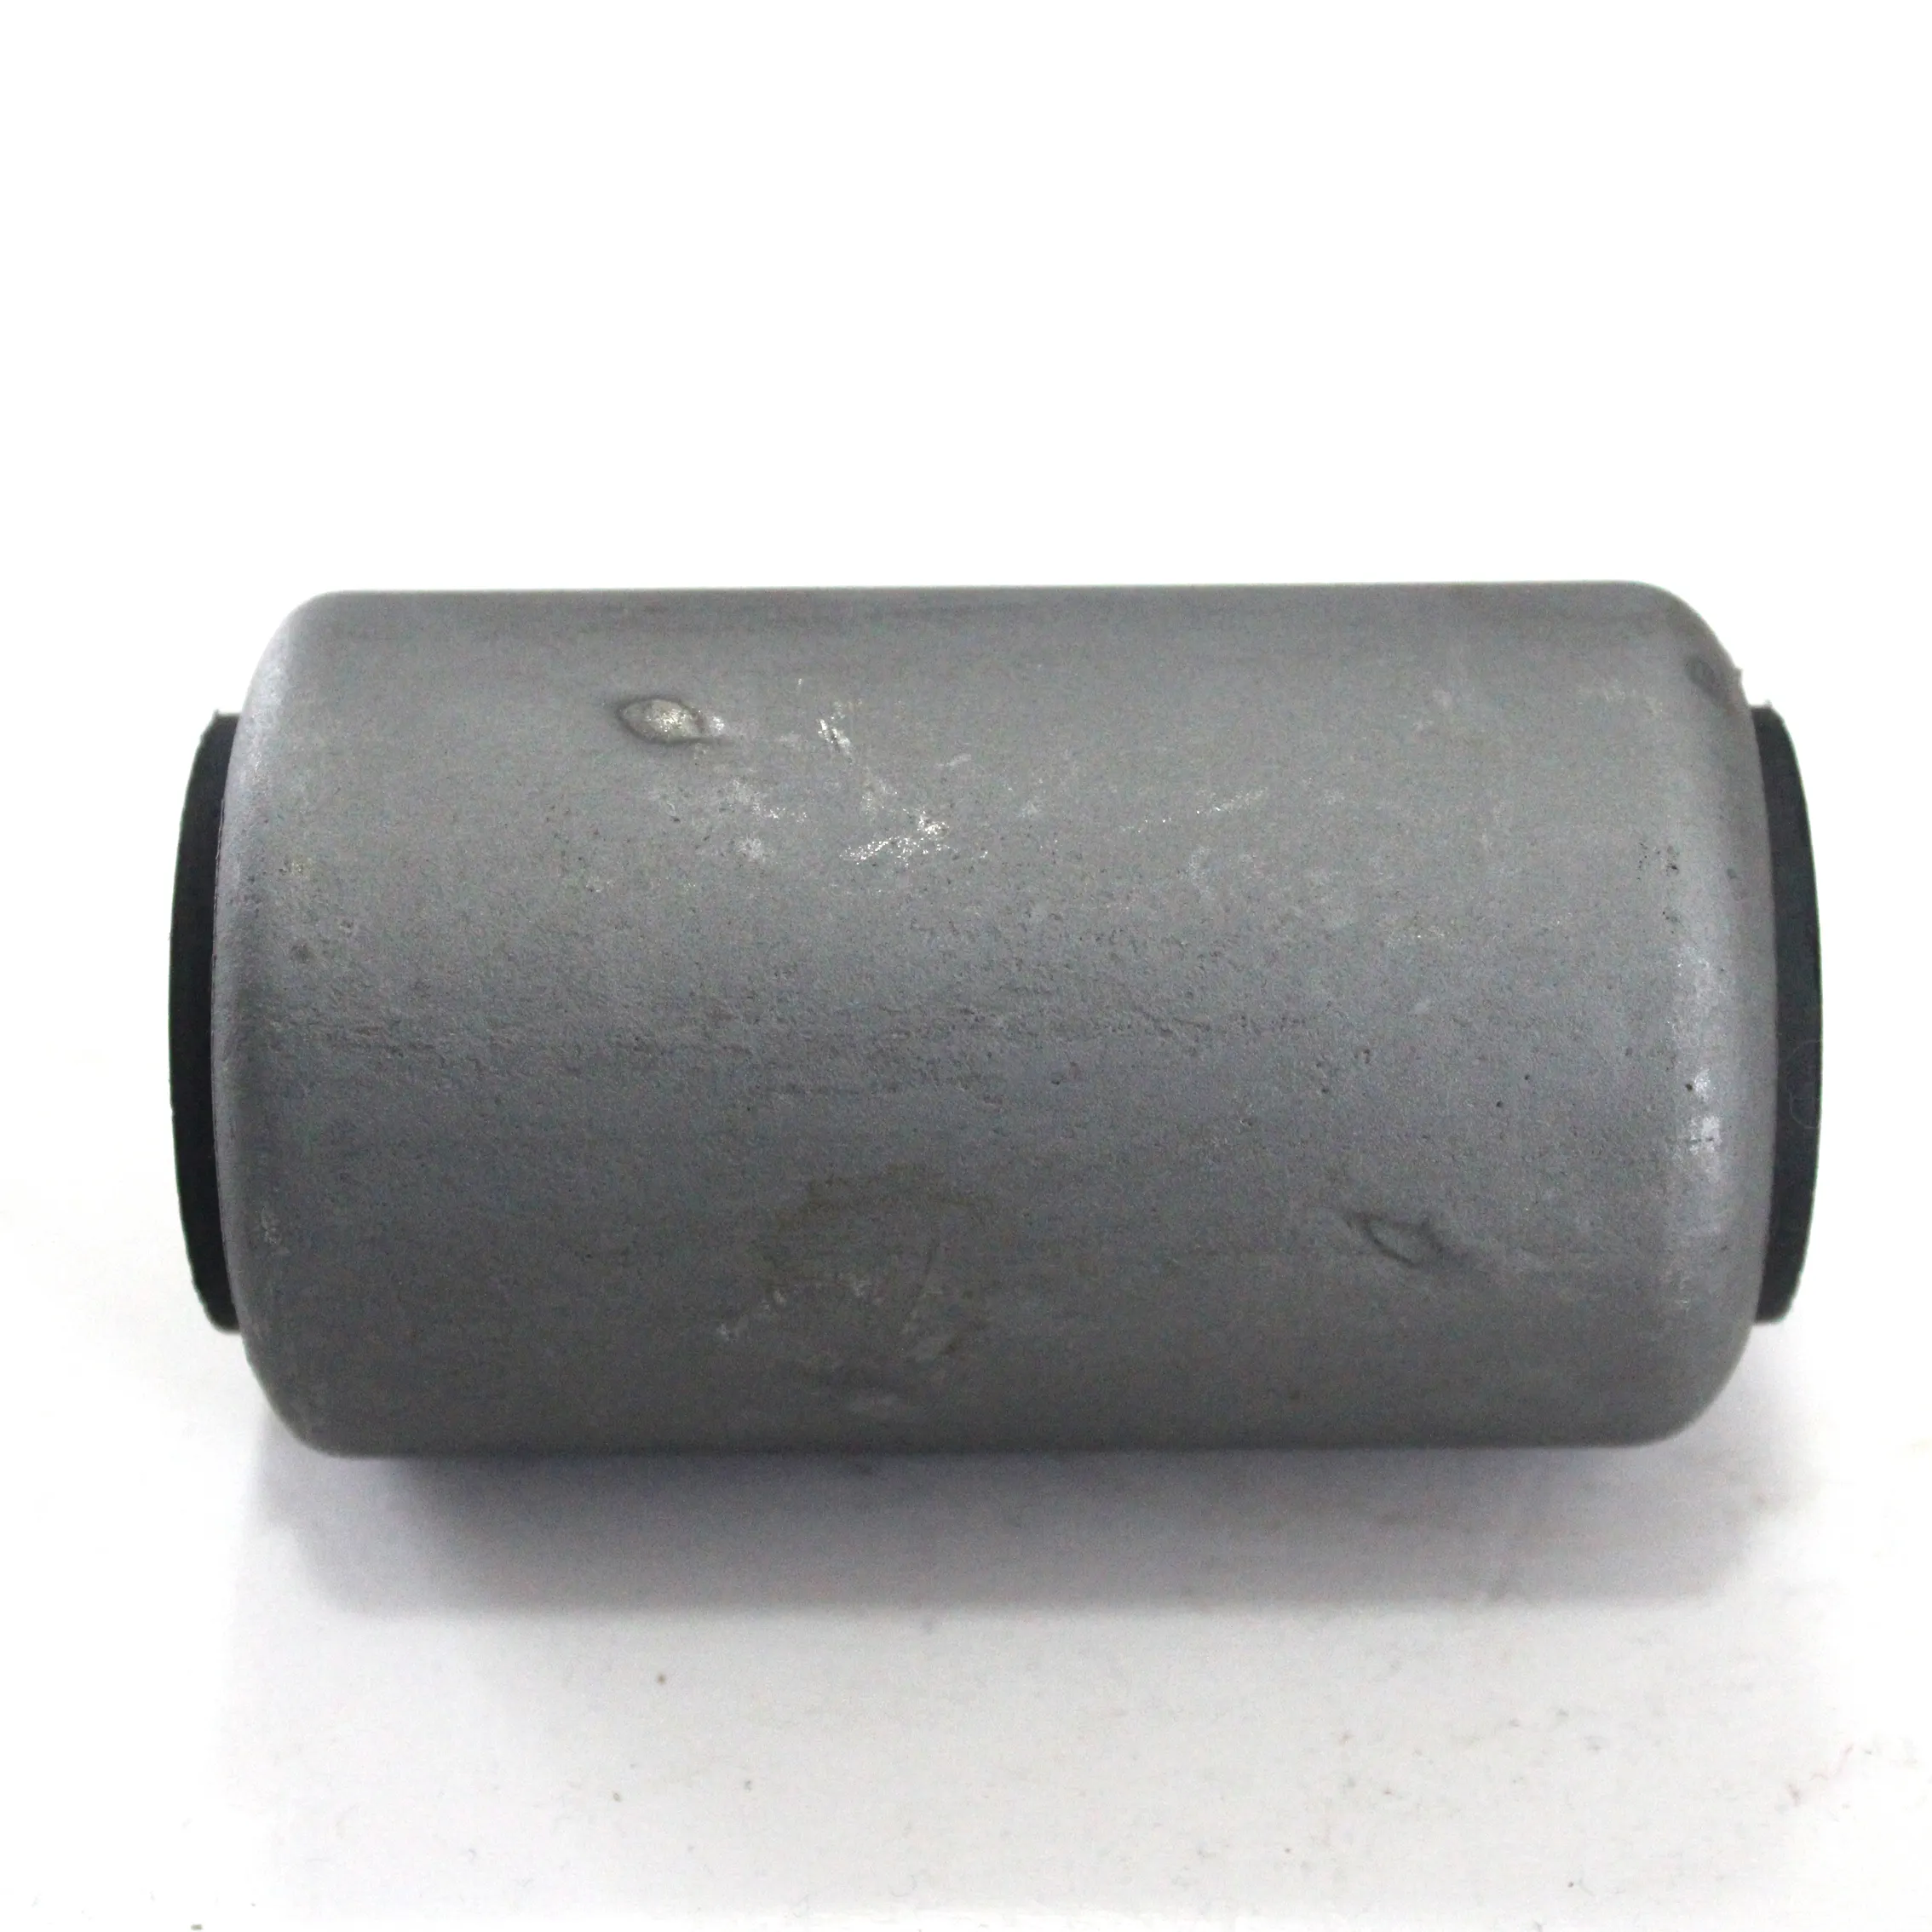 High quality European truck spare parts rubber bushings for truck rubber suspension bushing OEM 0003220385